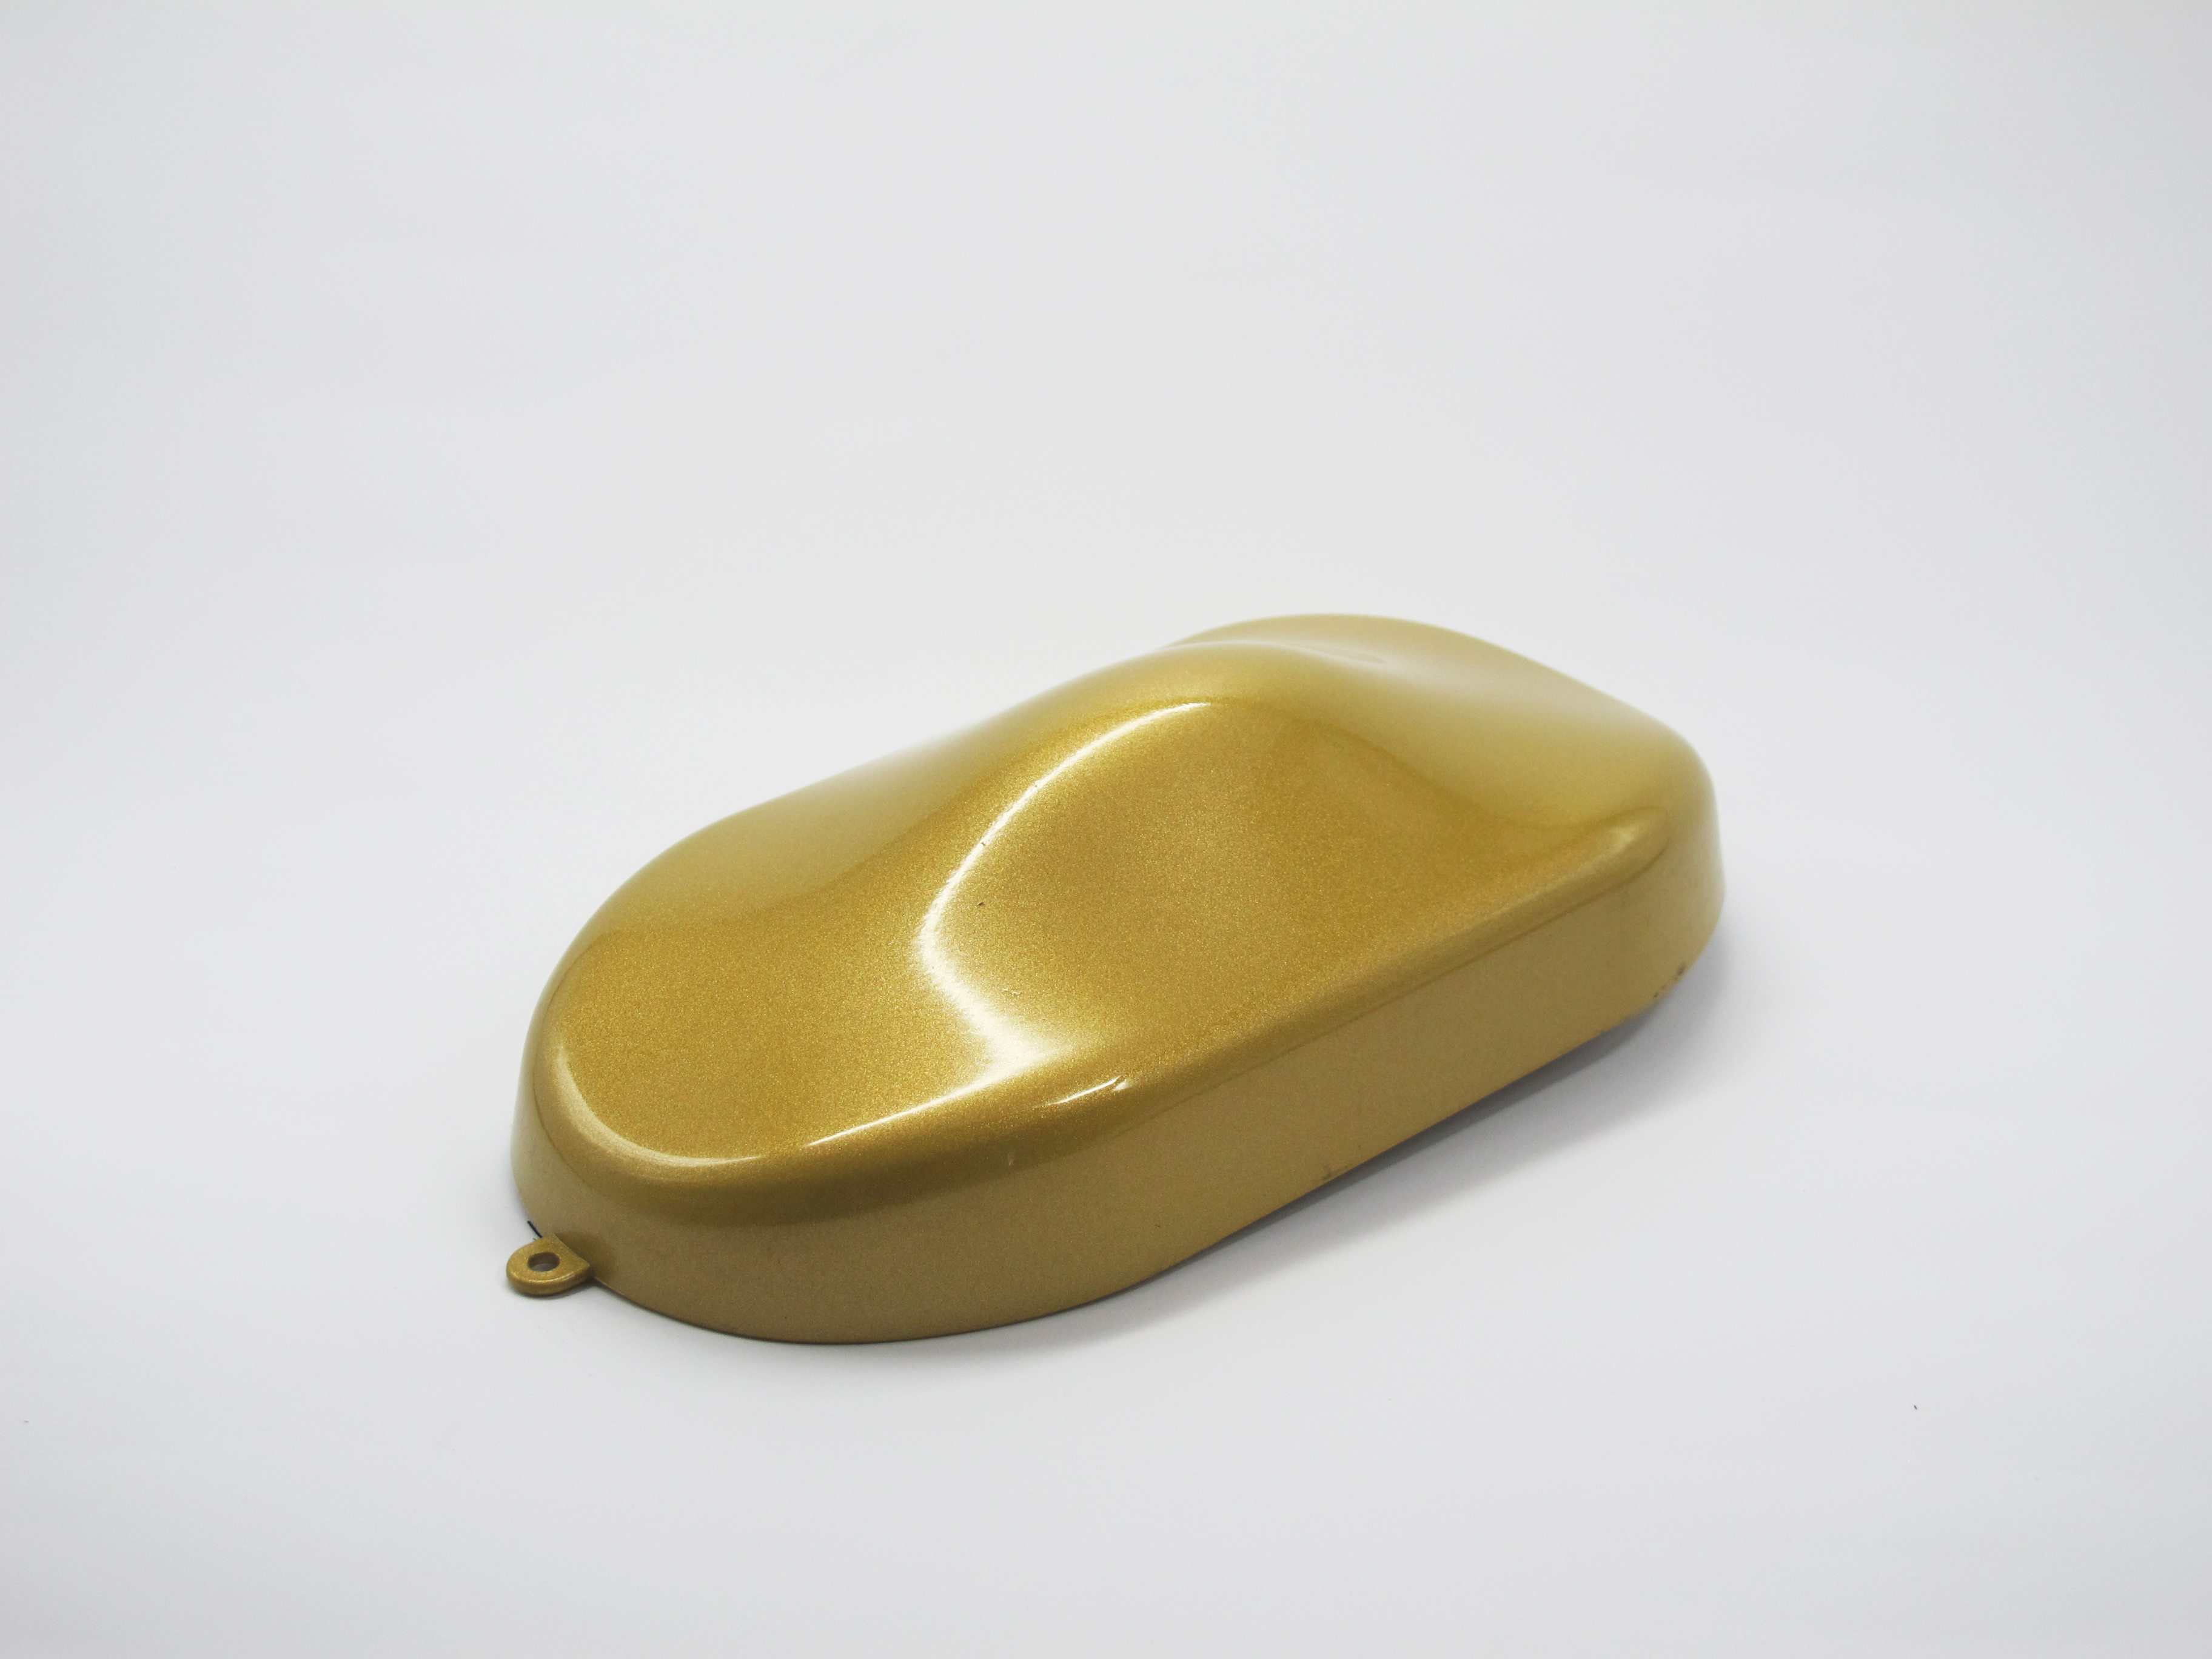 A 477 Transparent Yellow Solid Color with 50 Percent Metallic Coarse